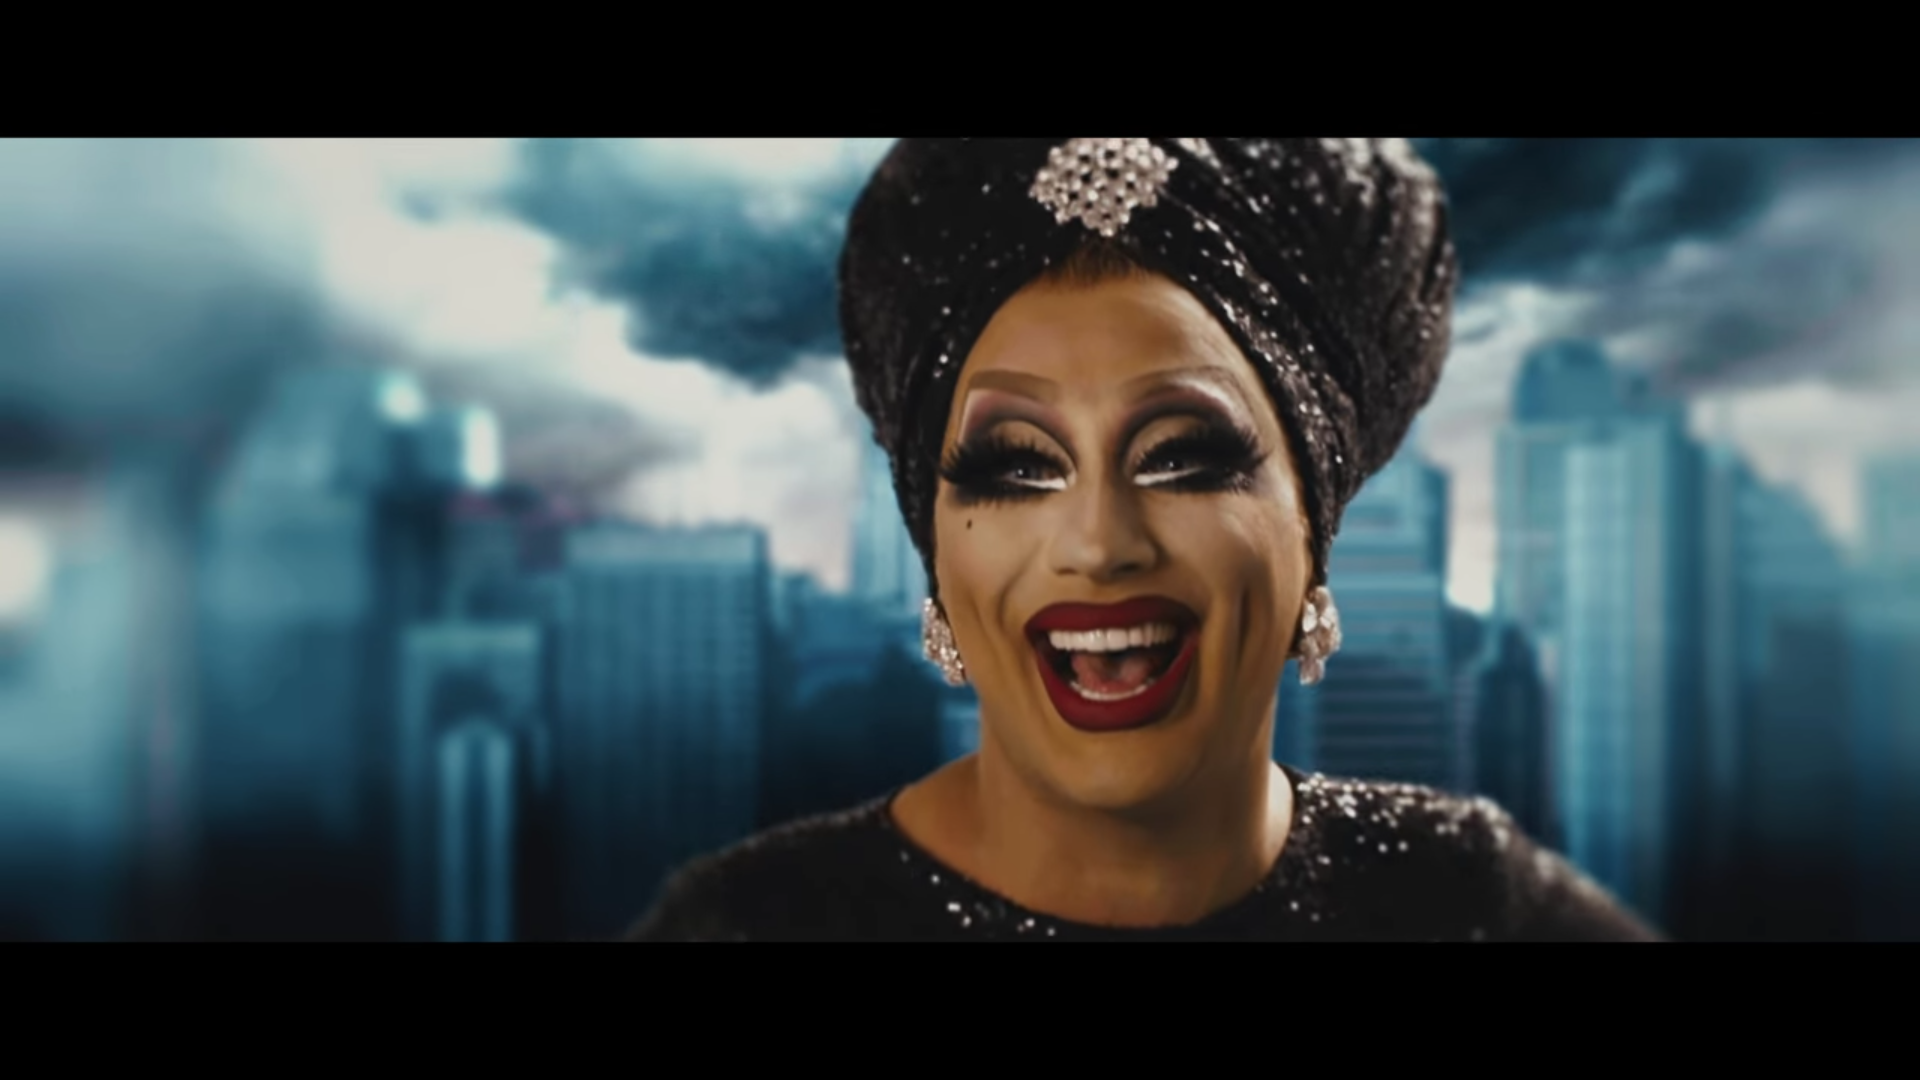 A drag queen wearing a sparkly turban laughs, a cloudy cityscape behind her.